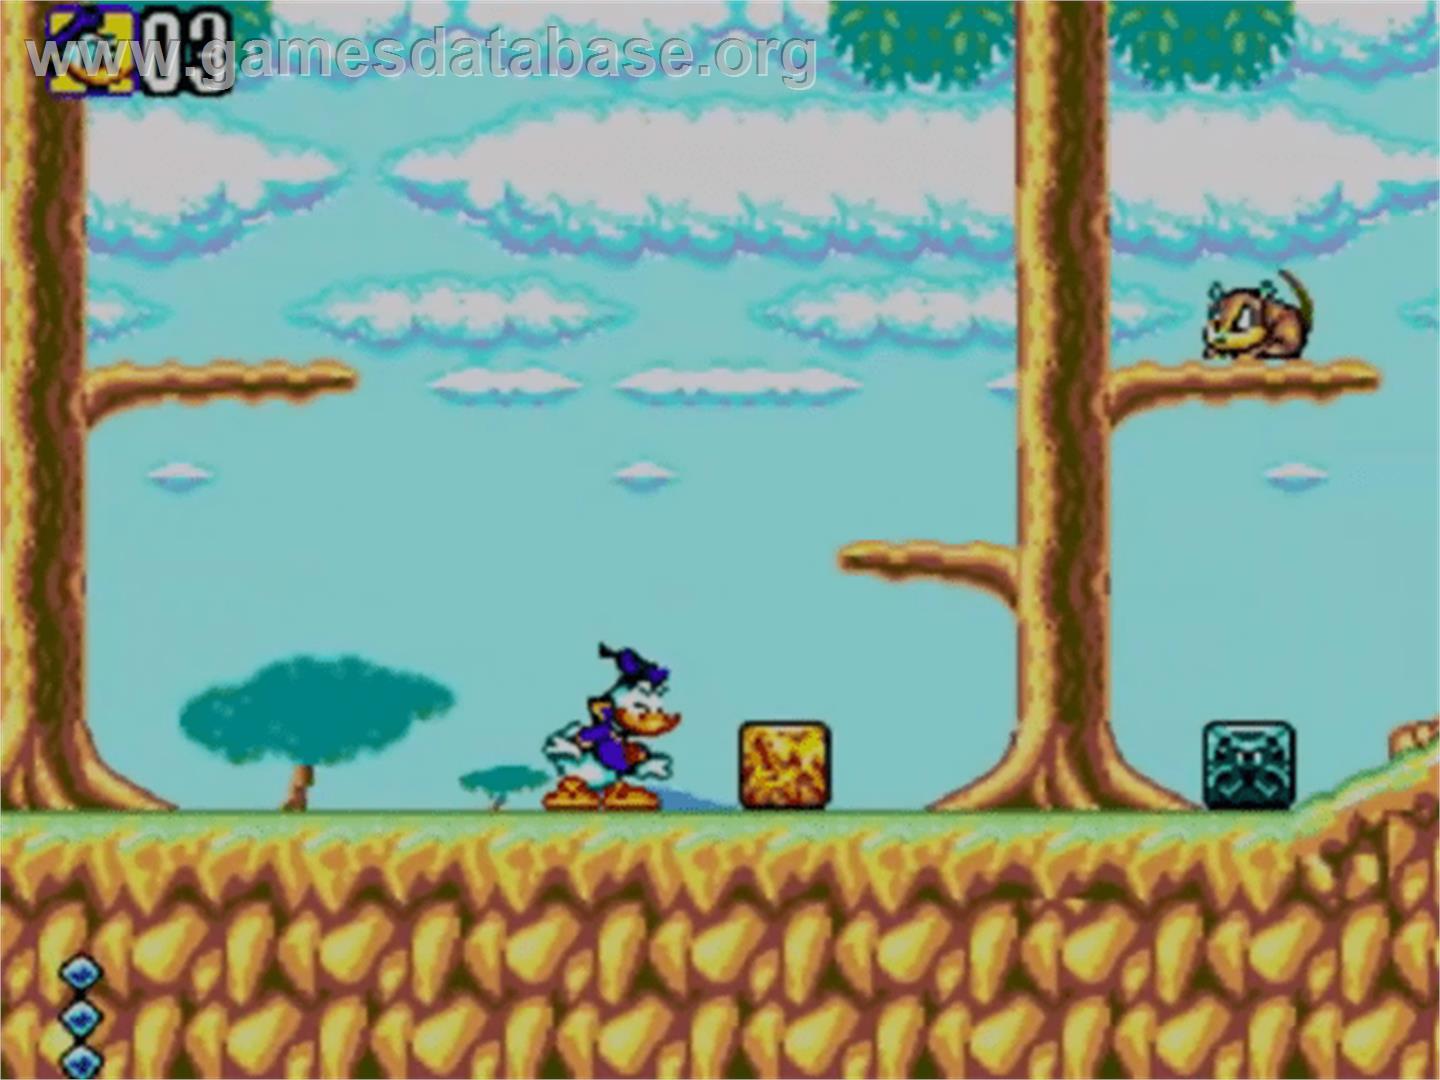 Deep Duck Trouble starring Donald Duck - Sega Master System - Artwork - In Game